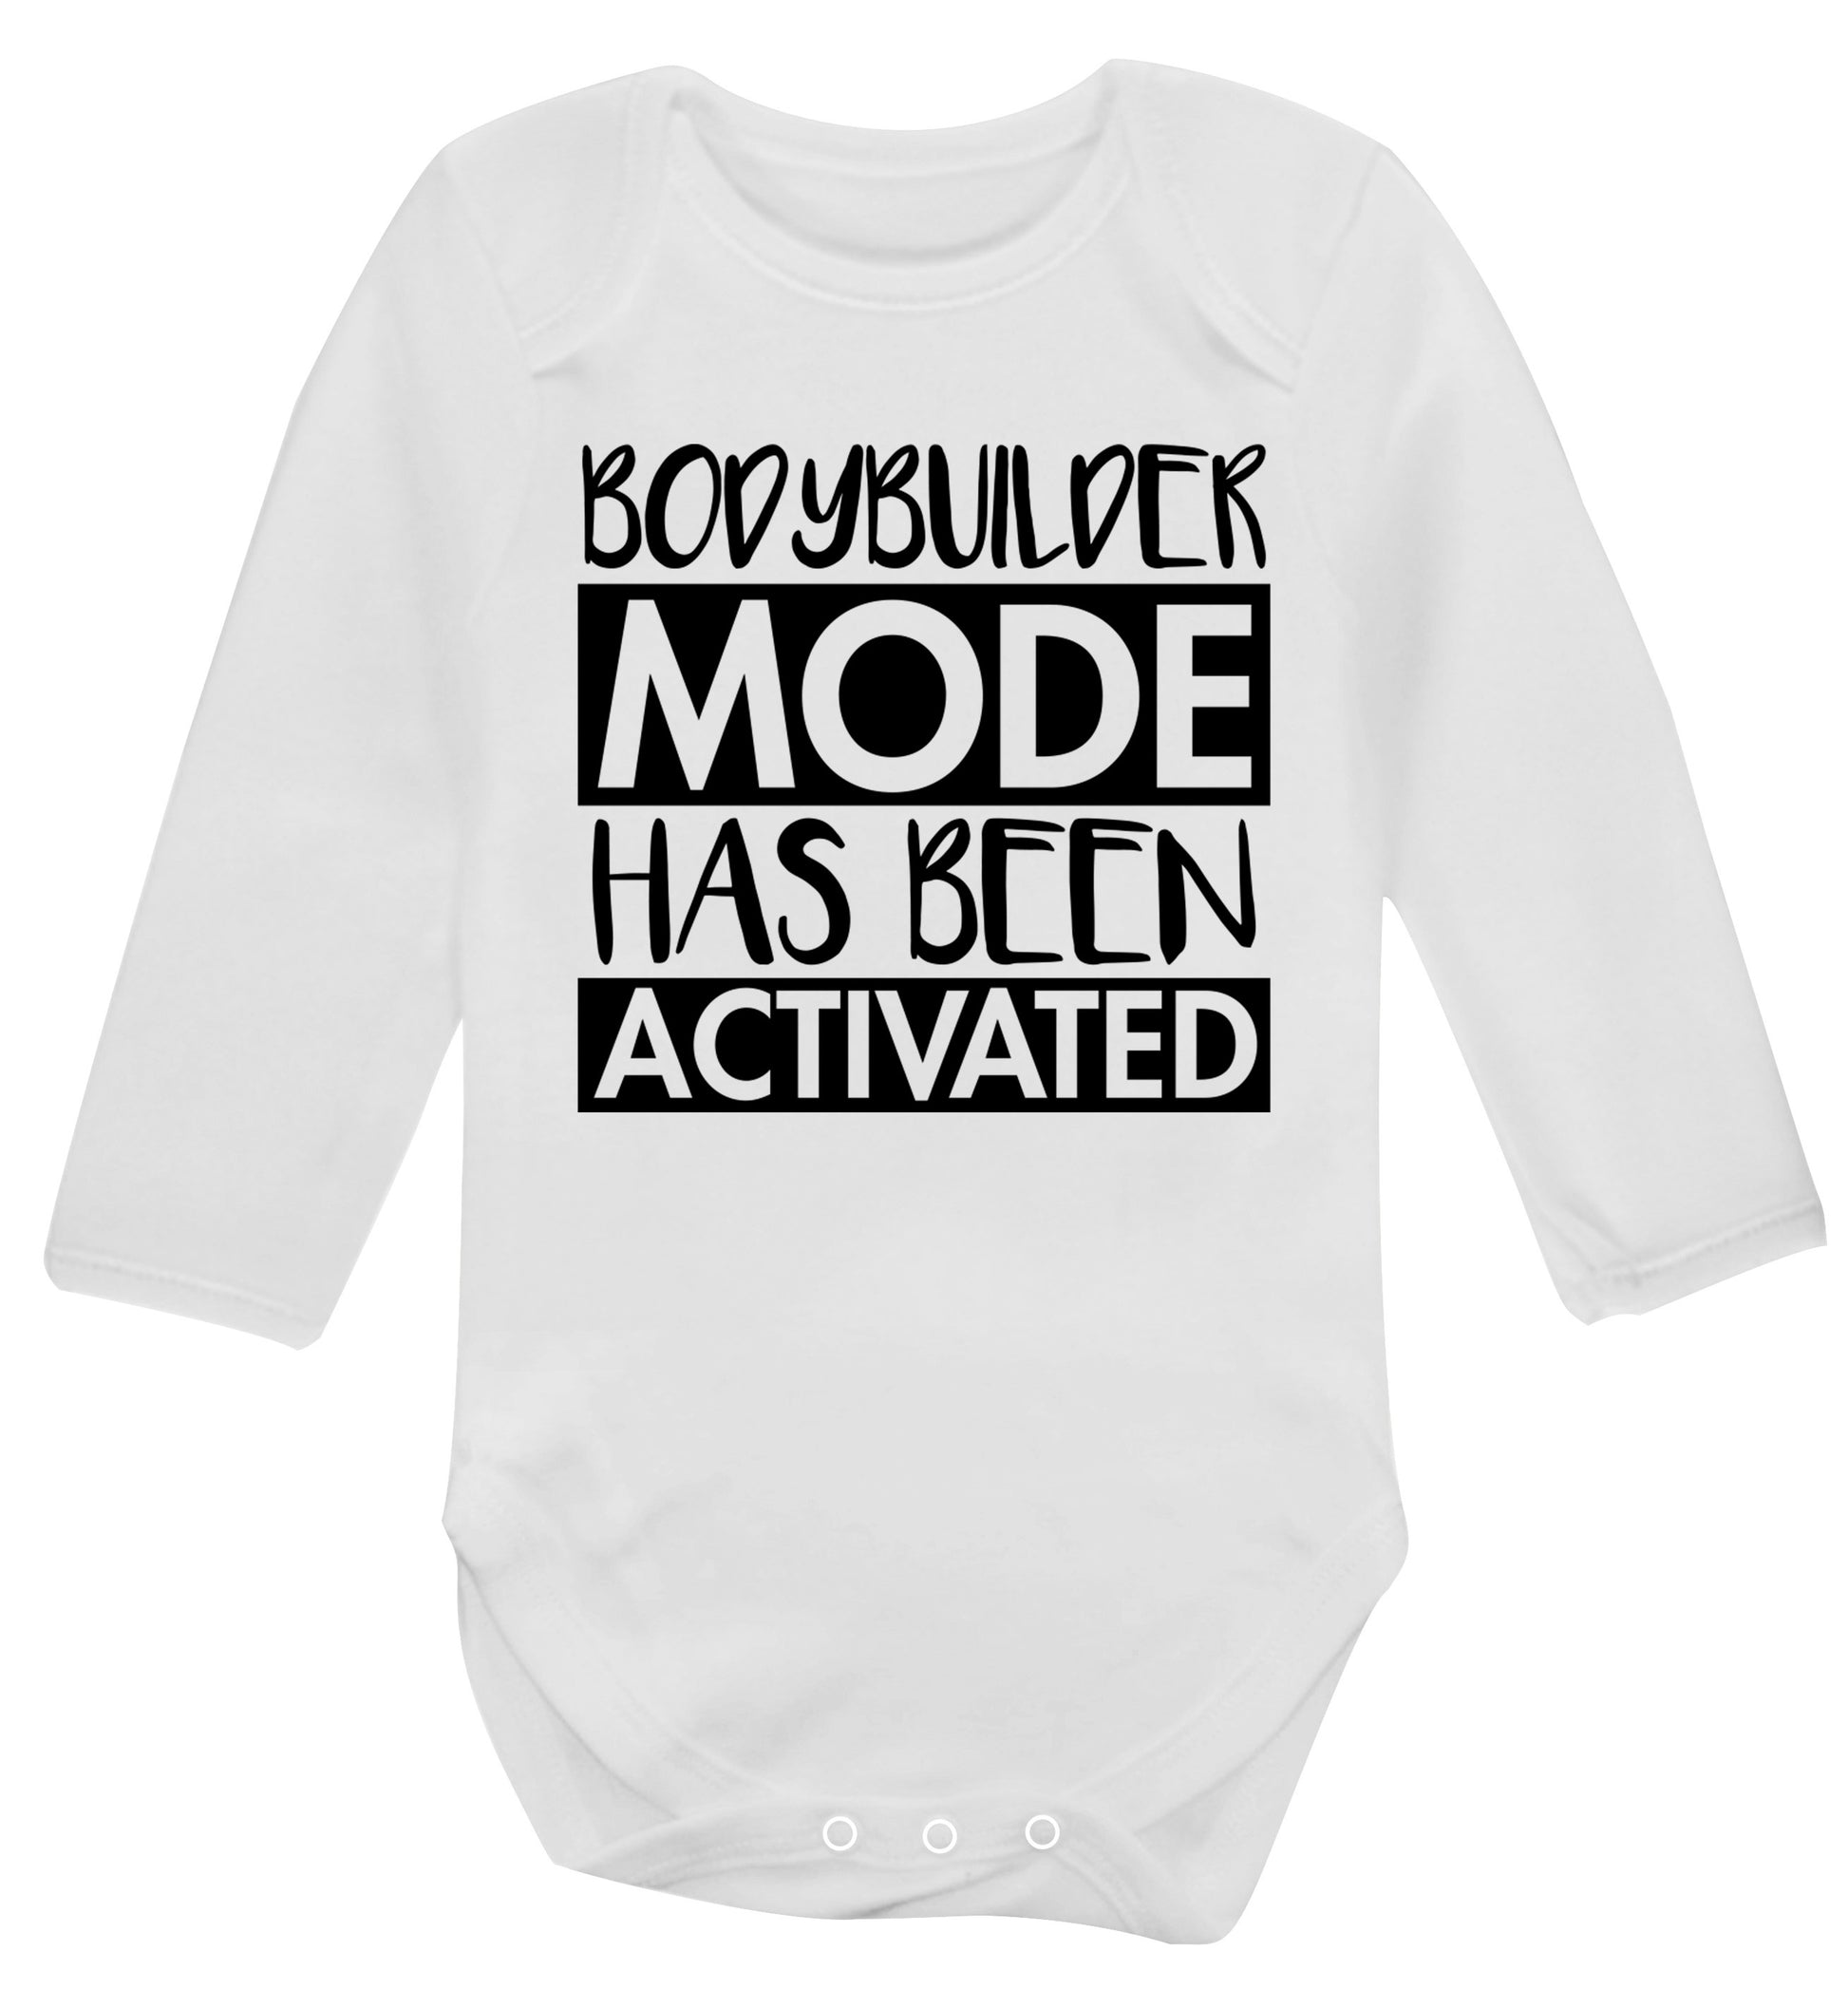 Bodybuilder mode activated Baby Vest long sleeved white 6-12 months